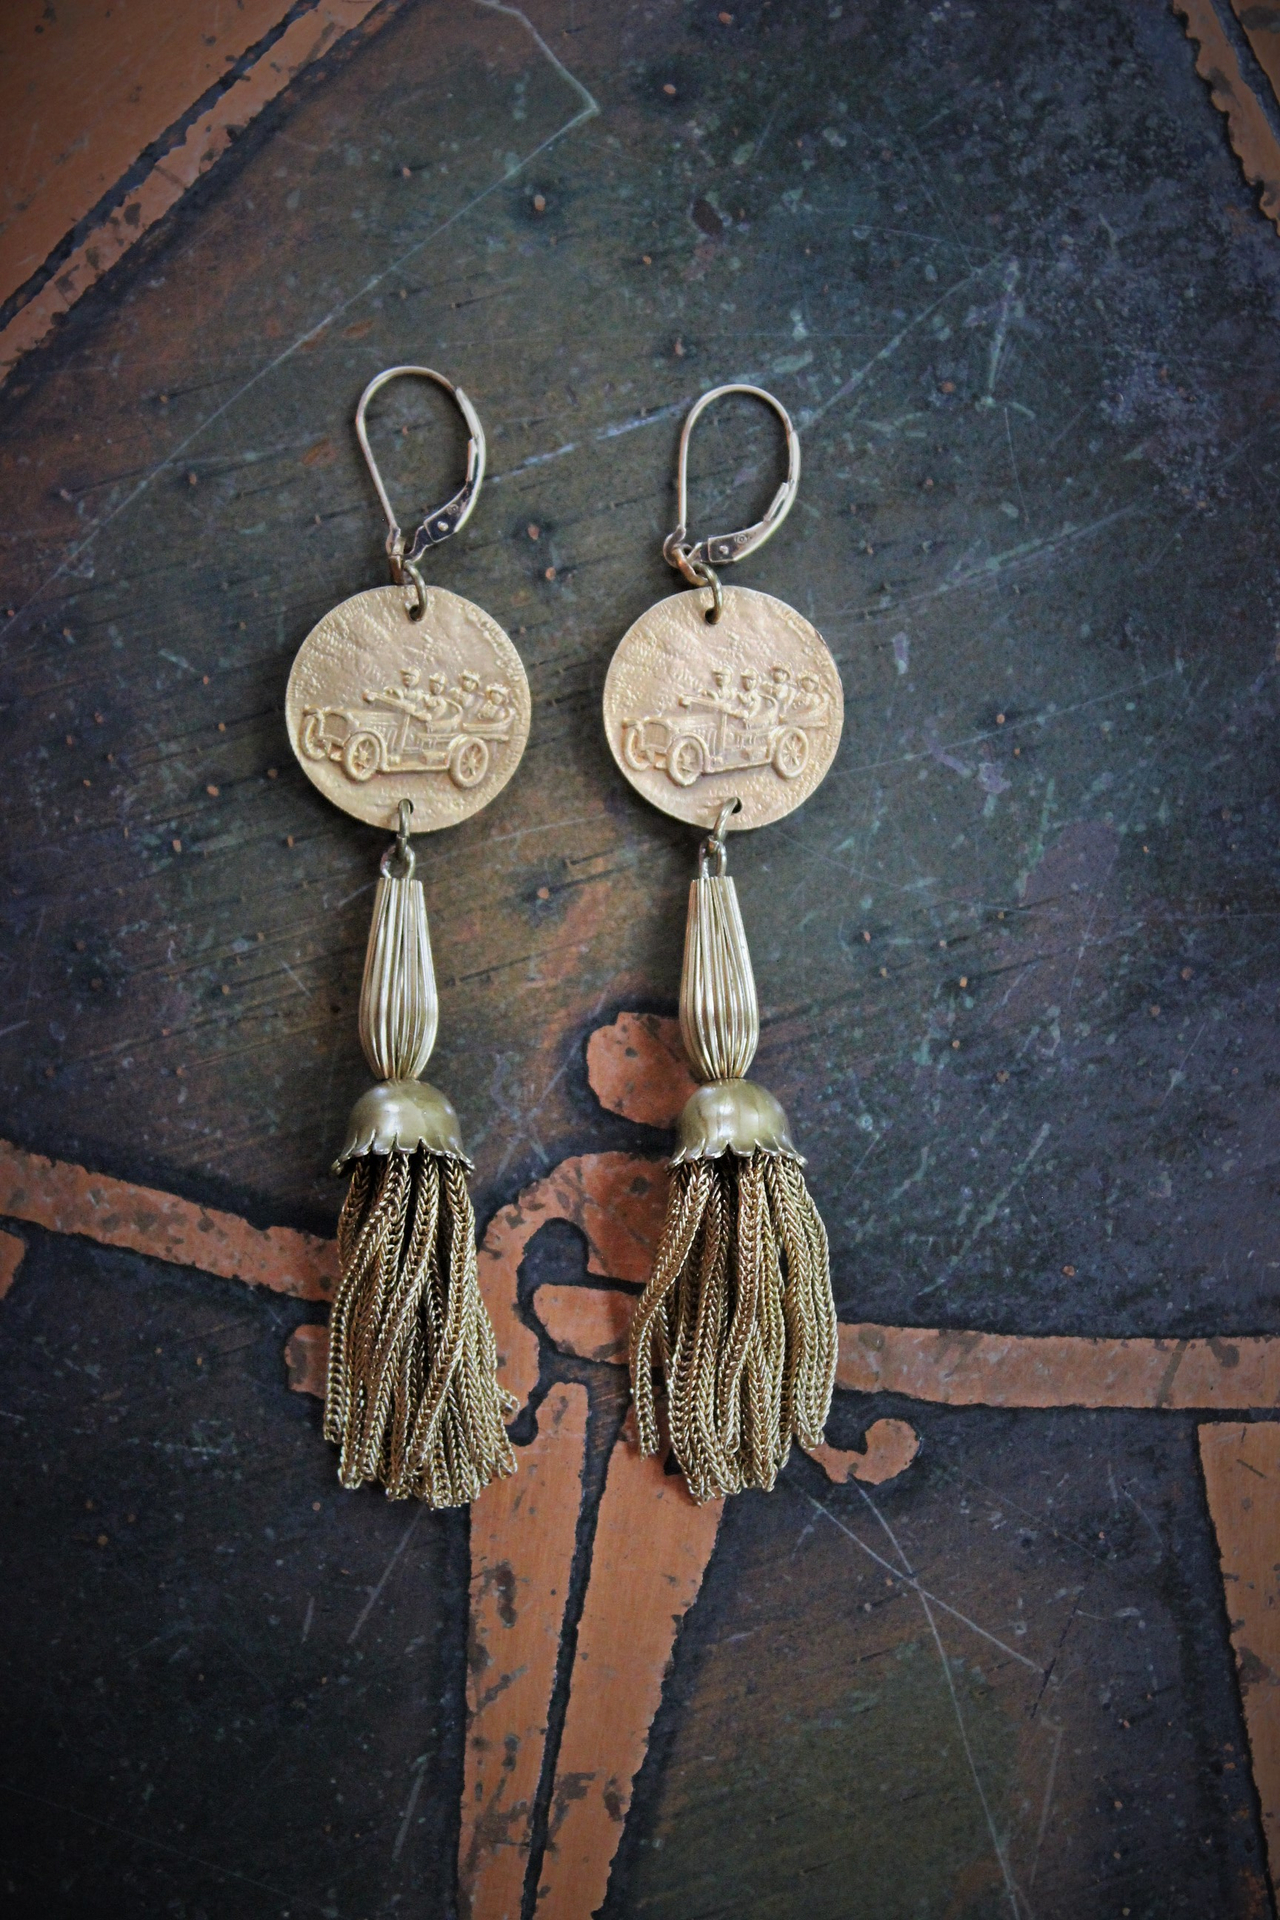 Rare Matching Antique Astrological Saint Christopher Earrings with Antique Foxtail Chain Tassels & Gold Filled Leverback Earring Wires